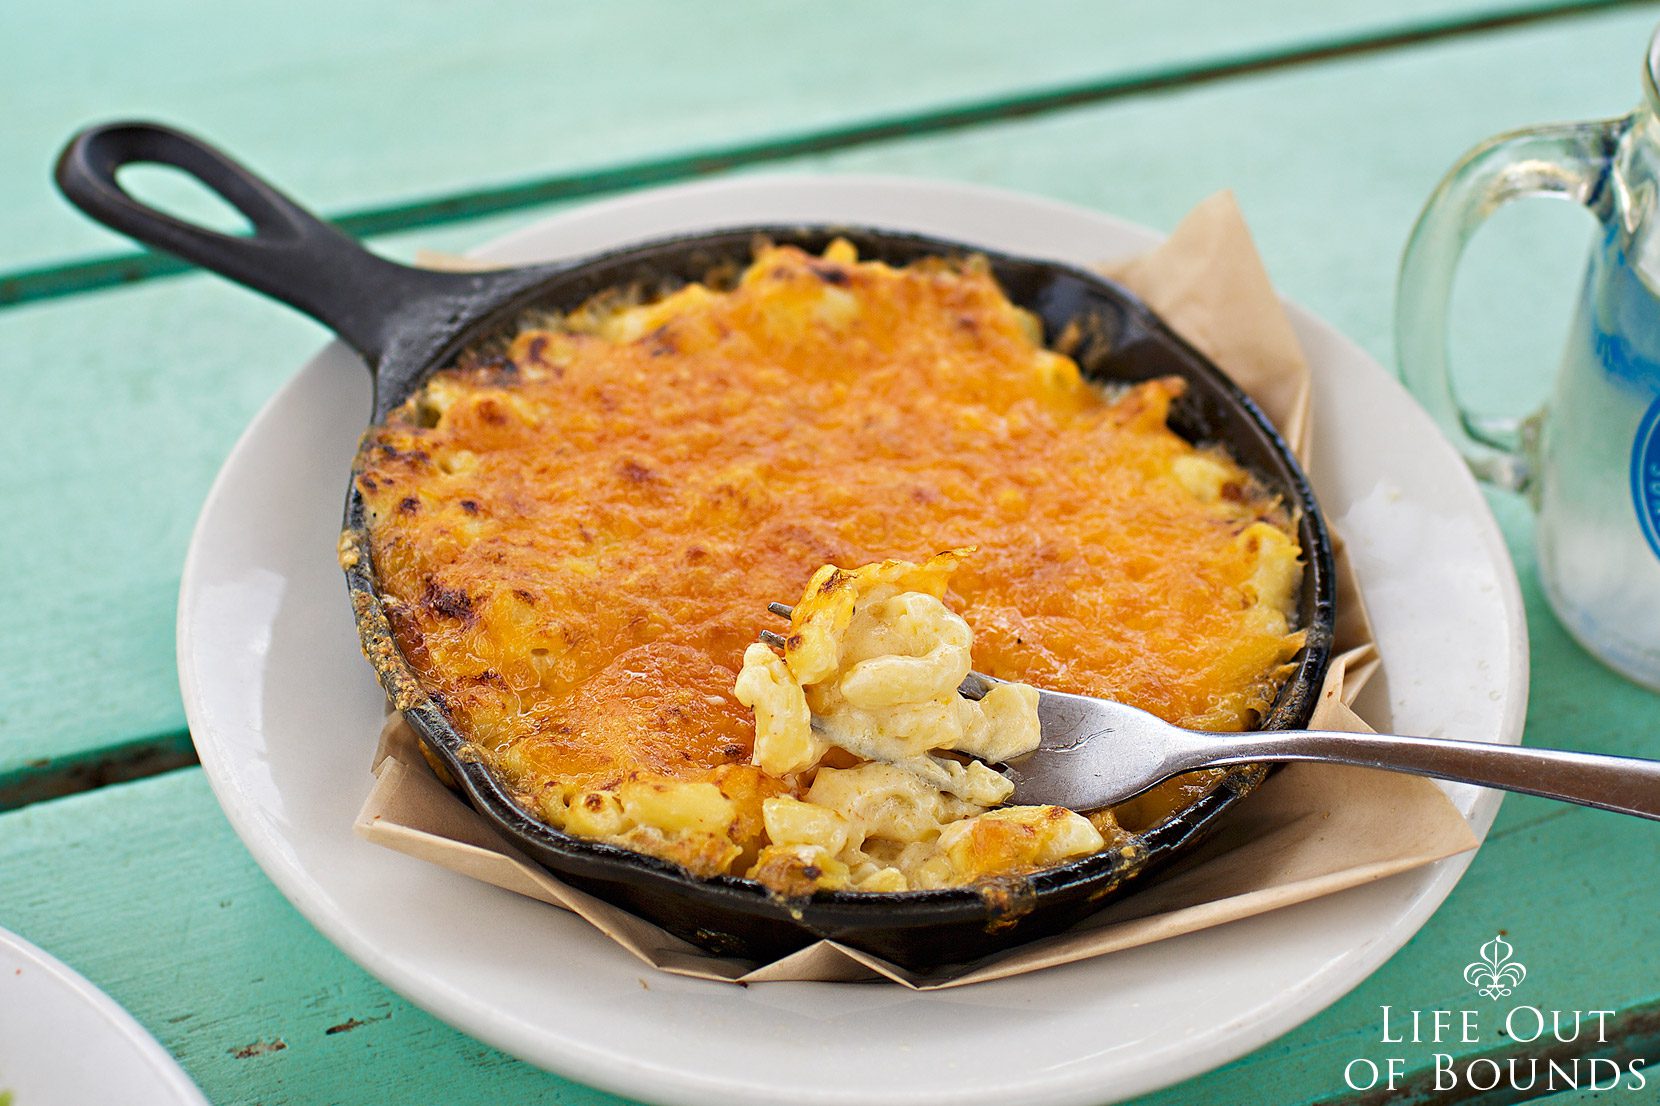 Baked-Mac-n-Cheese-at-The-Fremont-Diner-Sonoma-California